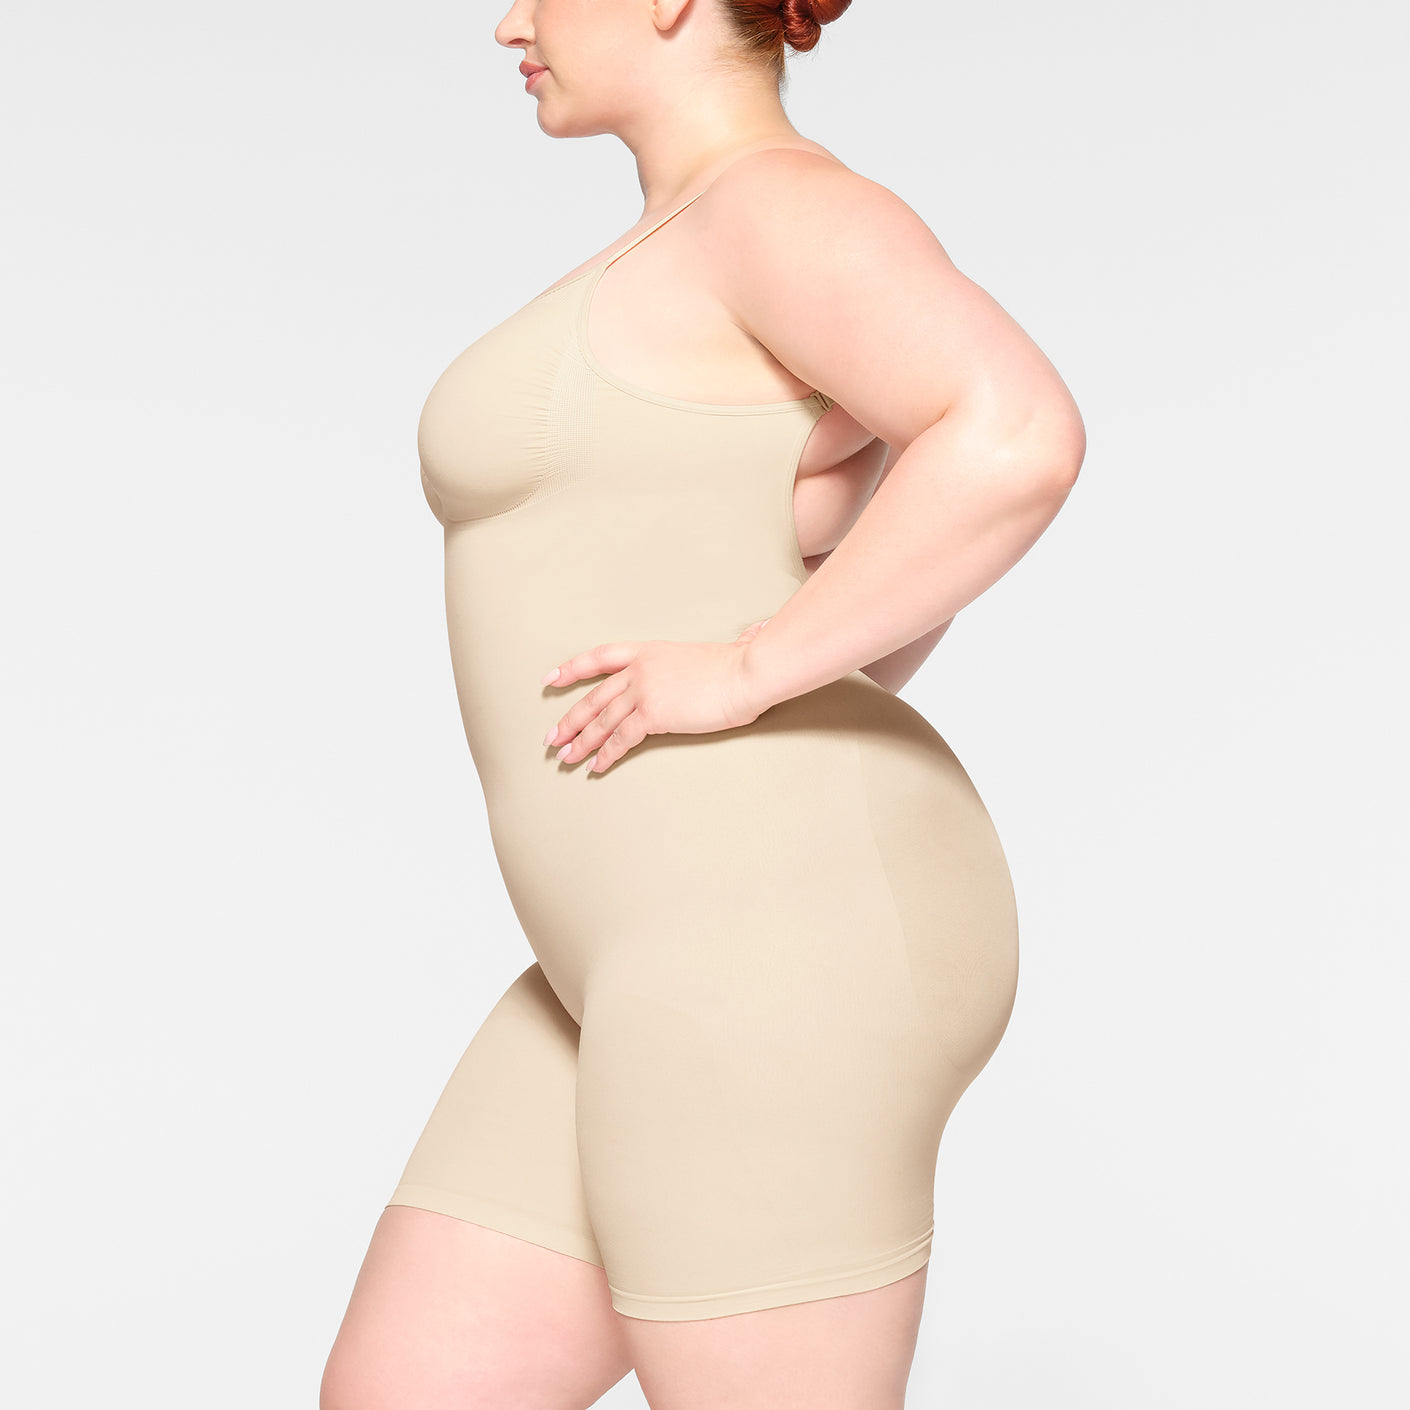 SCULPT SHAPEWEAR - Newest Products are on Sale! (@sculpt.id) • Instagram  photos and videos